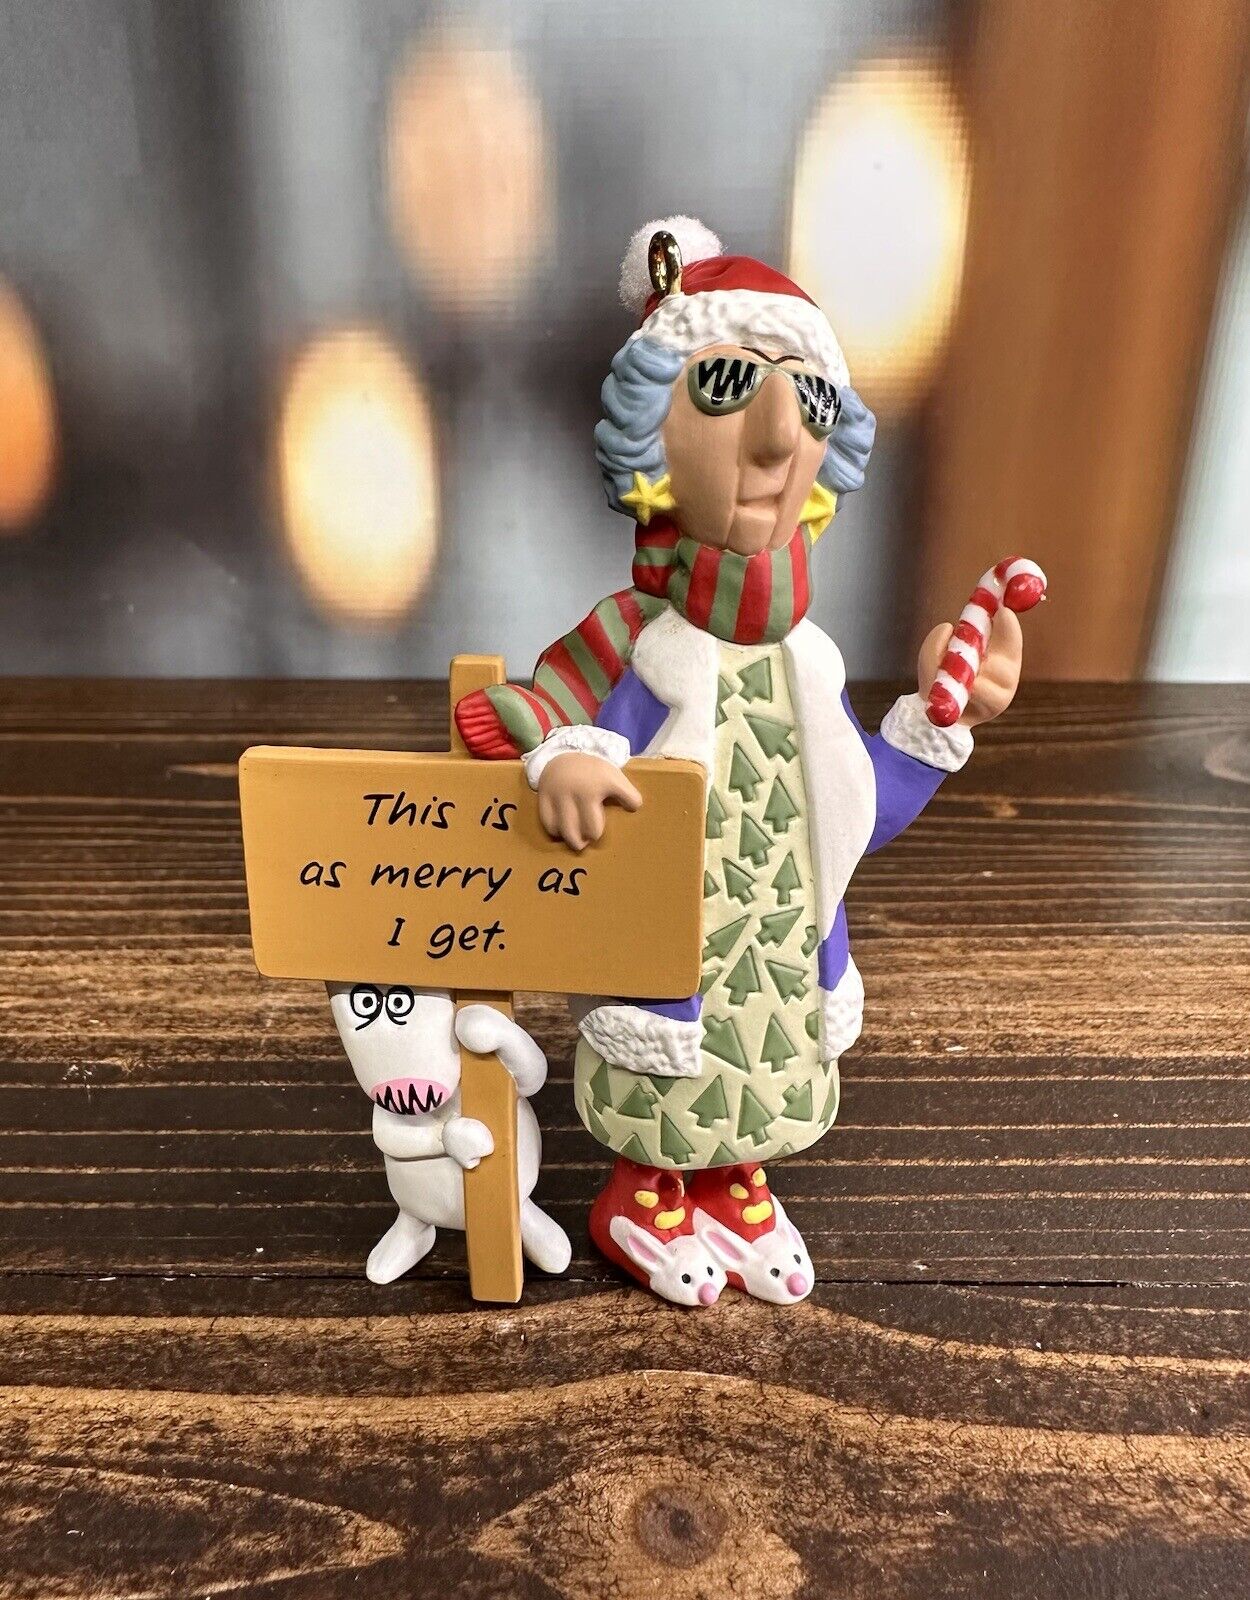 MAXINE Christmas Ornament “This Is As Merry As I Get” Maxine & Dog Vintage